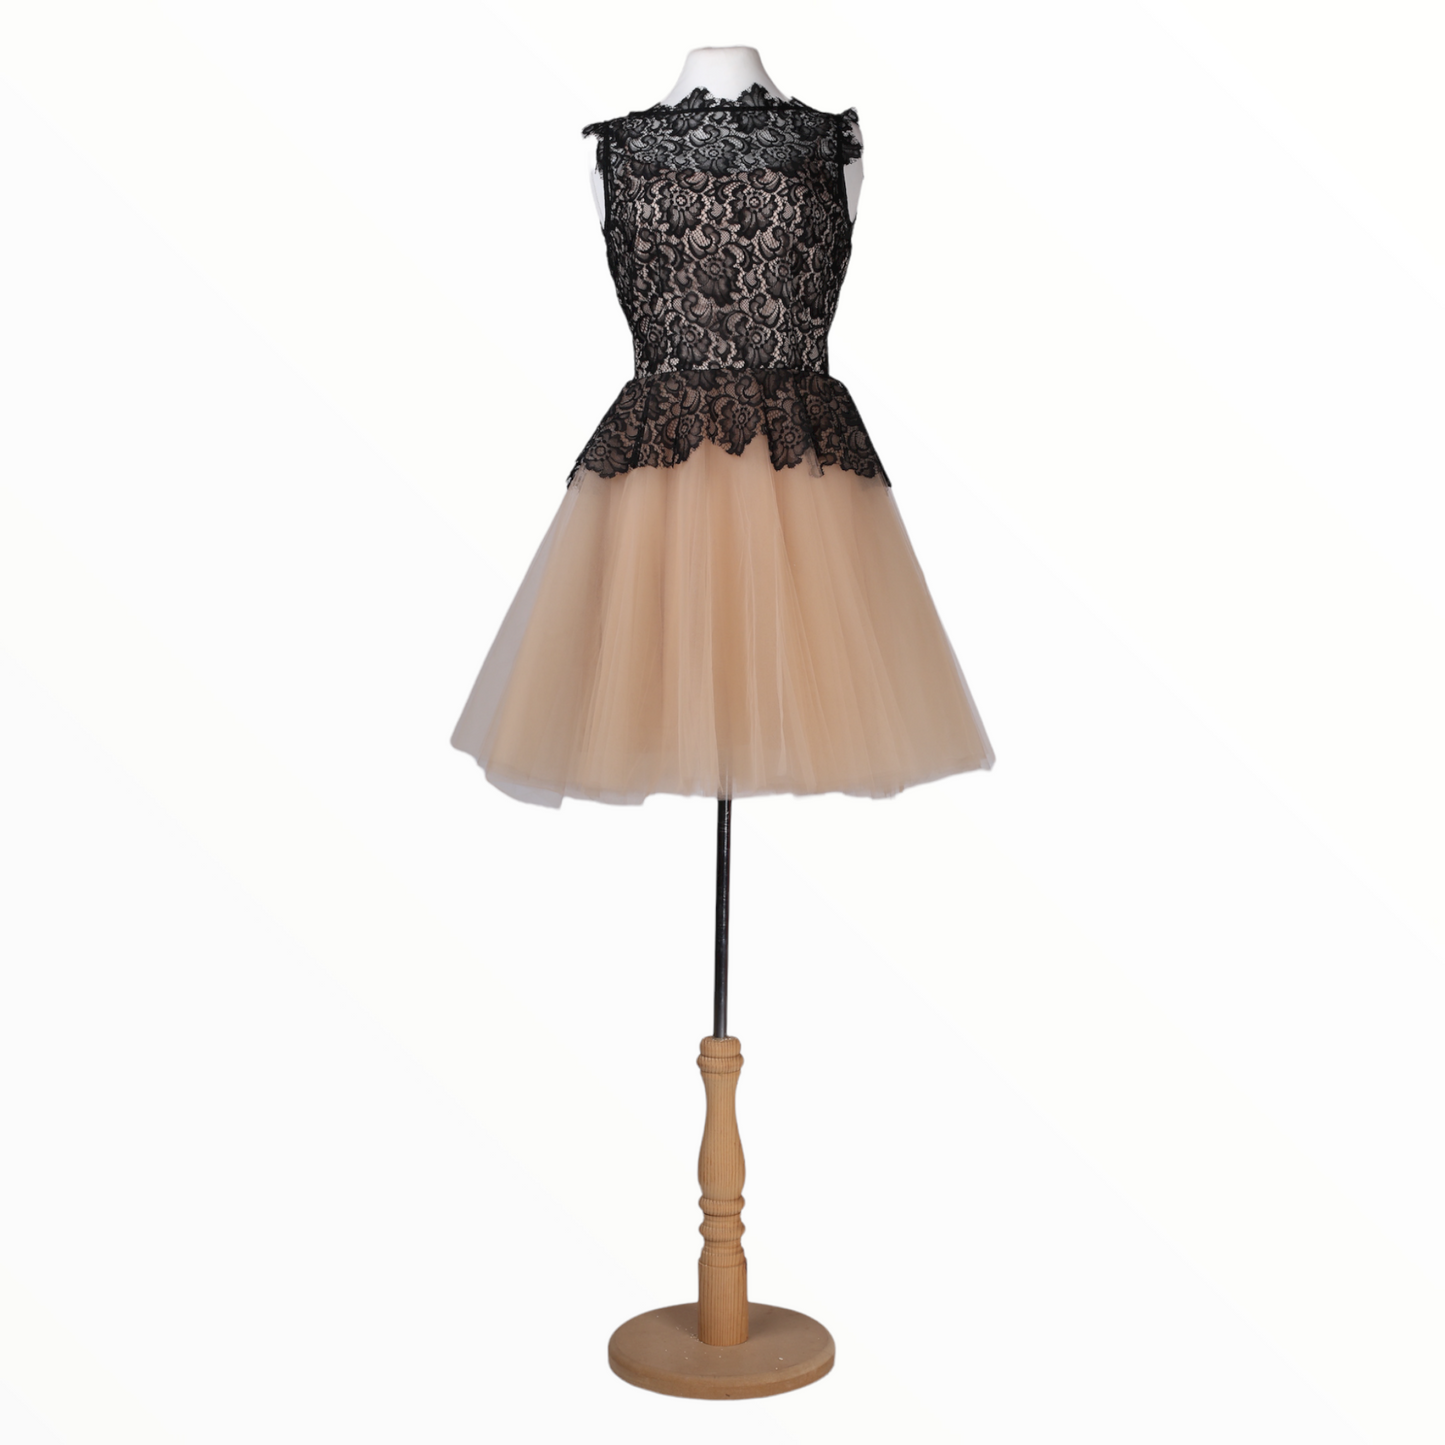 Nha Khanh Mini Black Lace With Beige Tulle Dress